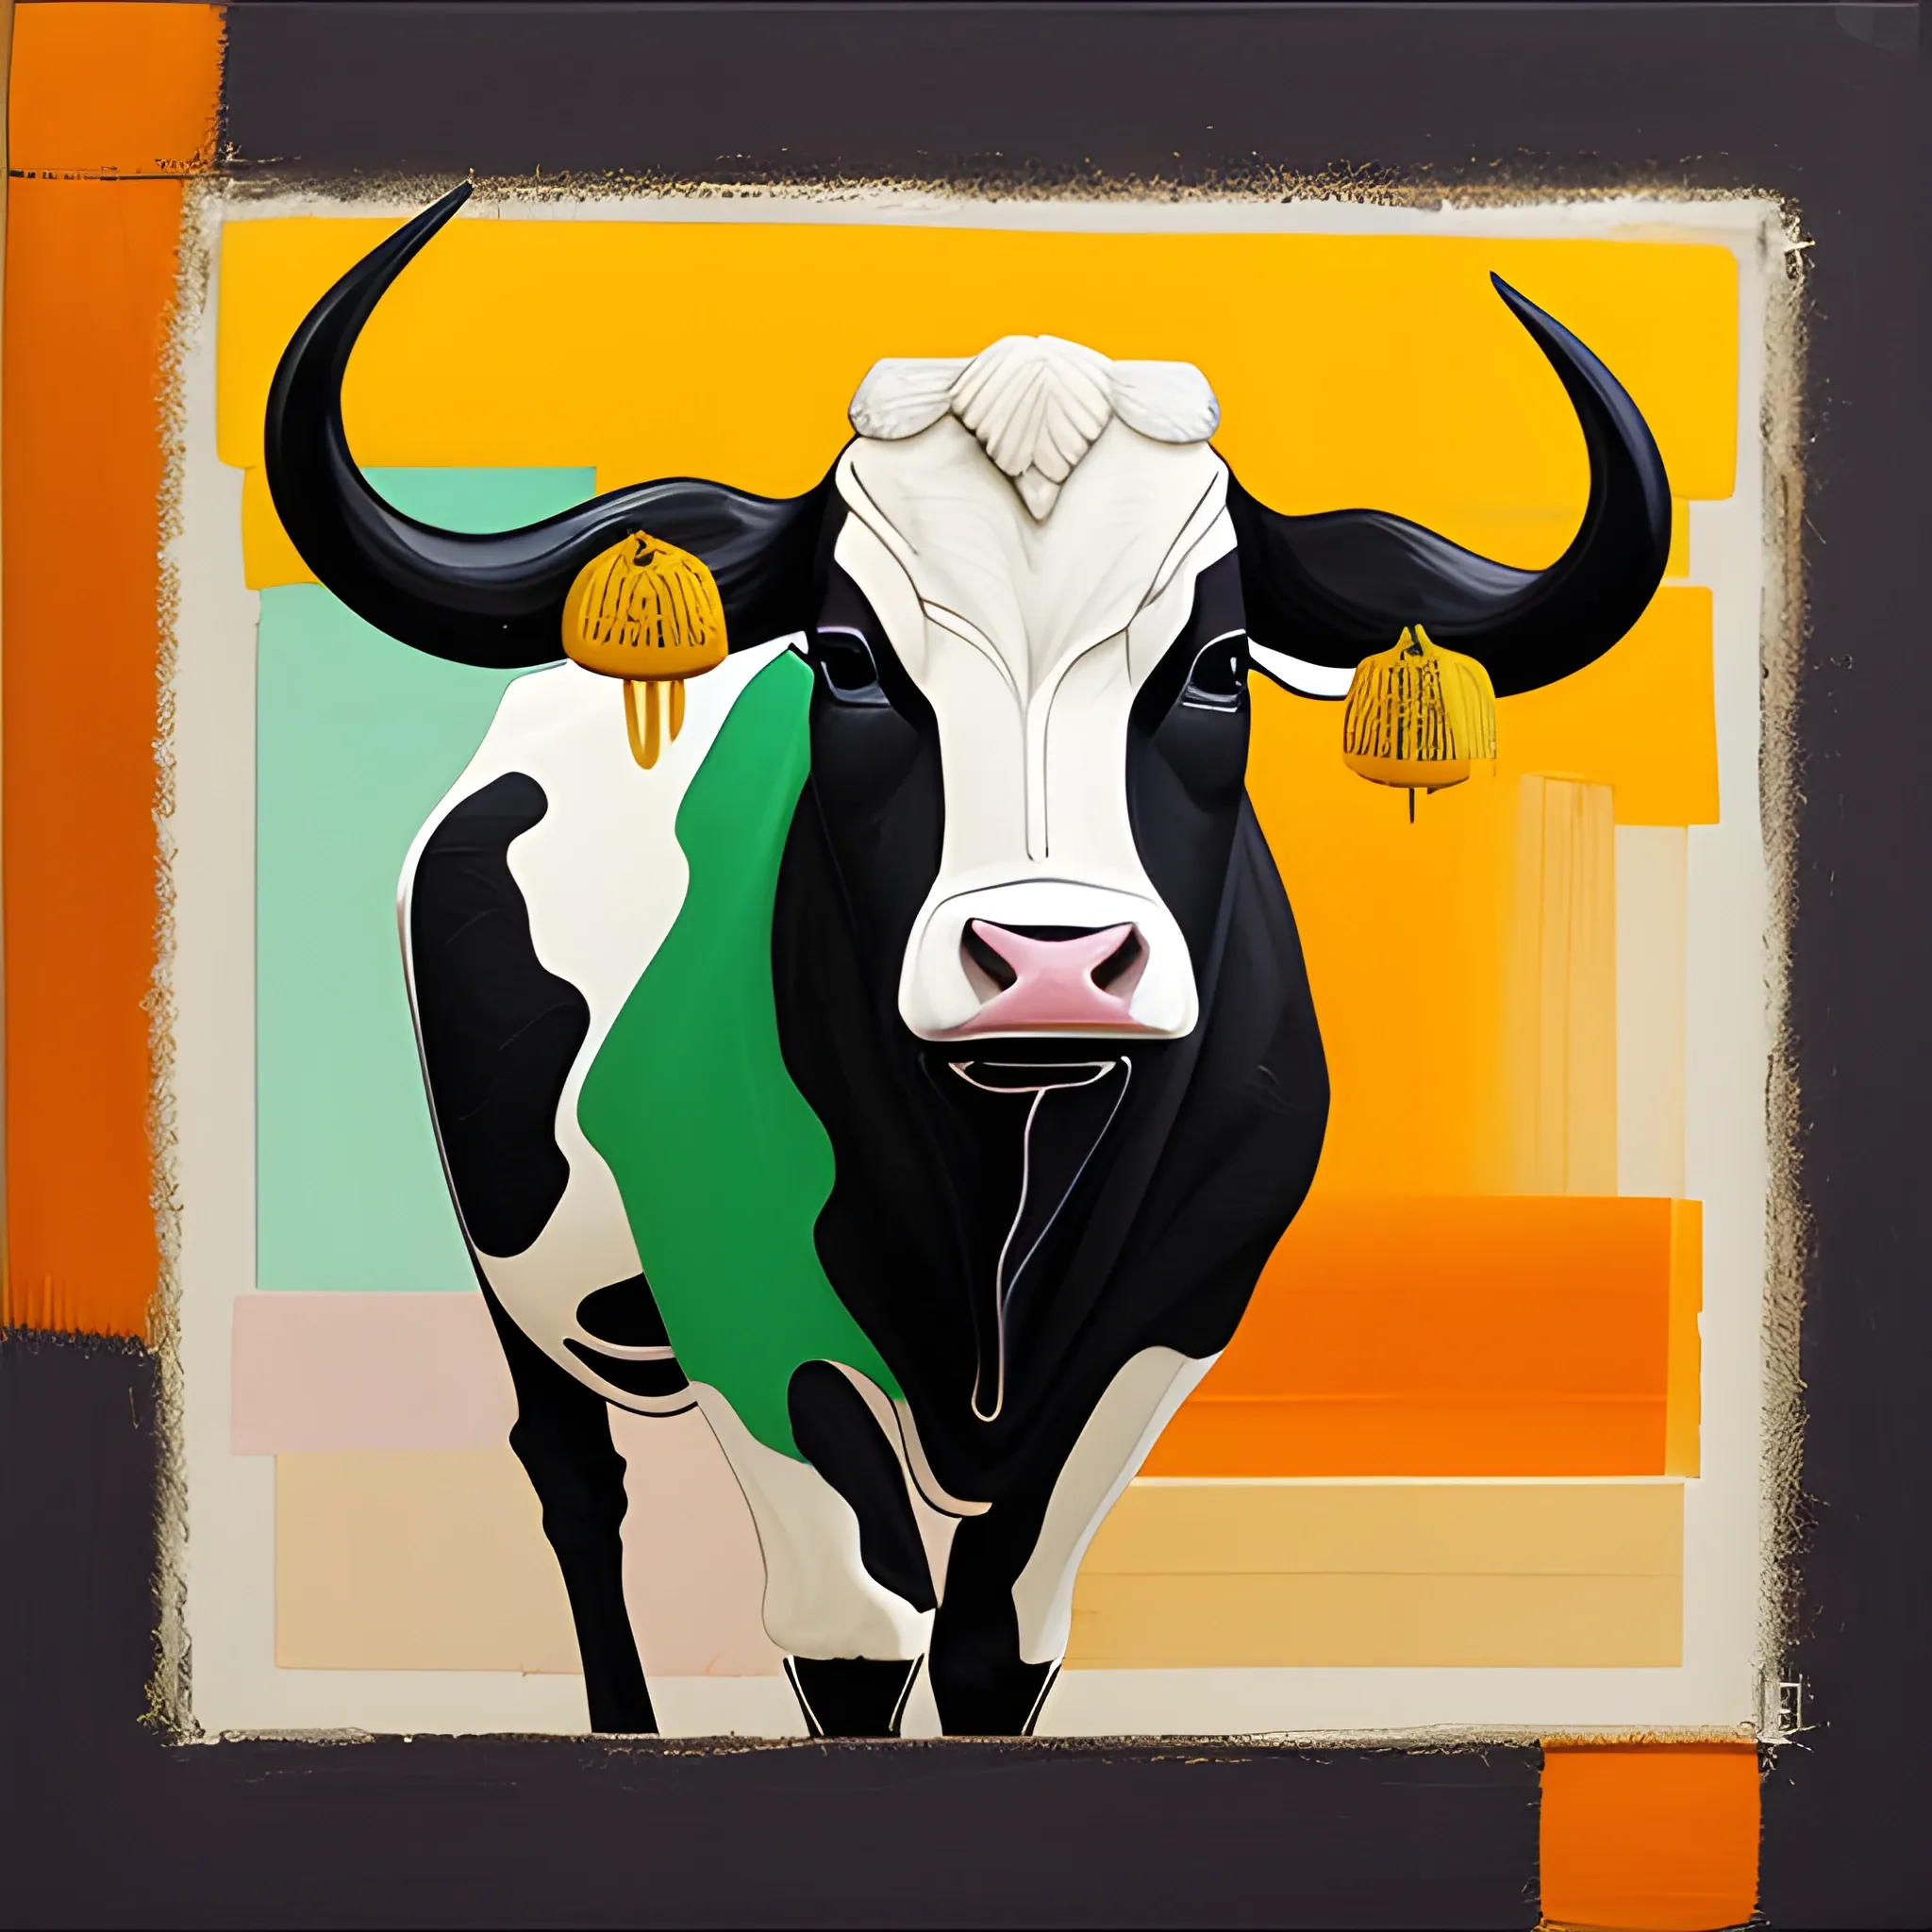 This is a dynamic abstract painting depicting cows as the subject. The background is layered with deep hues, conveying a sense of blurry impression. At the center is a distorted black cow figure, expressing a sense of strength. The cow's form is depicted with thick, textured brush strokes, conveying the texture of the skin. The horns and hooves are accentuated with sharp lines, contrasting strongly against the background. Following the cow are swirling blocks of color, like dust kicked up as the cow runs. The blocks are collaged with warm hues of orange, yellow and cool hues of green, blue, creating a sense of motion. The overall composition is unrestrained and saturated, with strong visual impact, conveying the characteristics of abstract art.